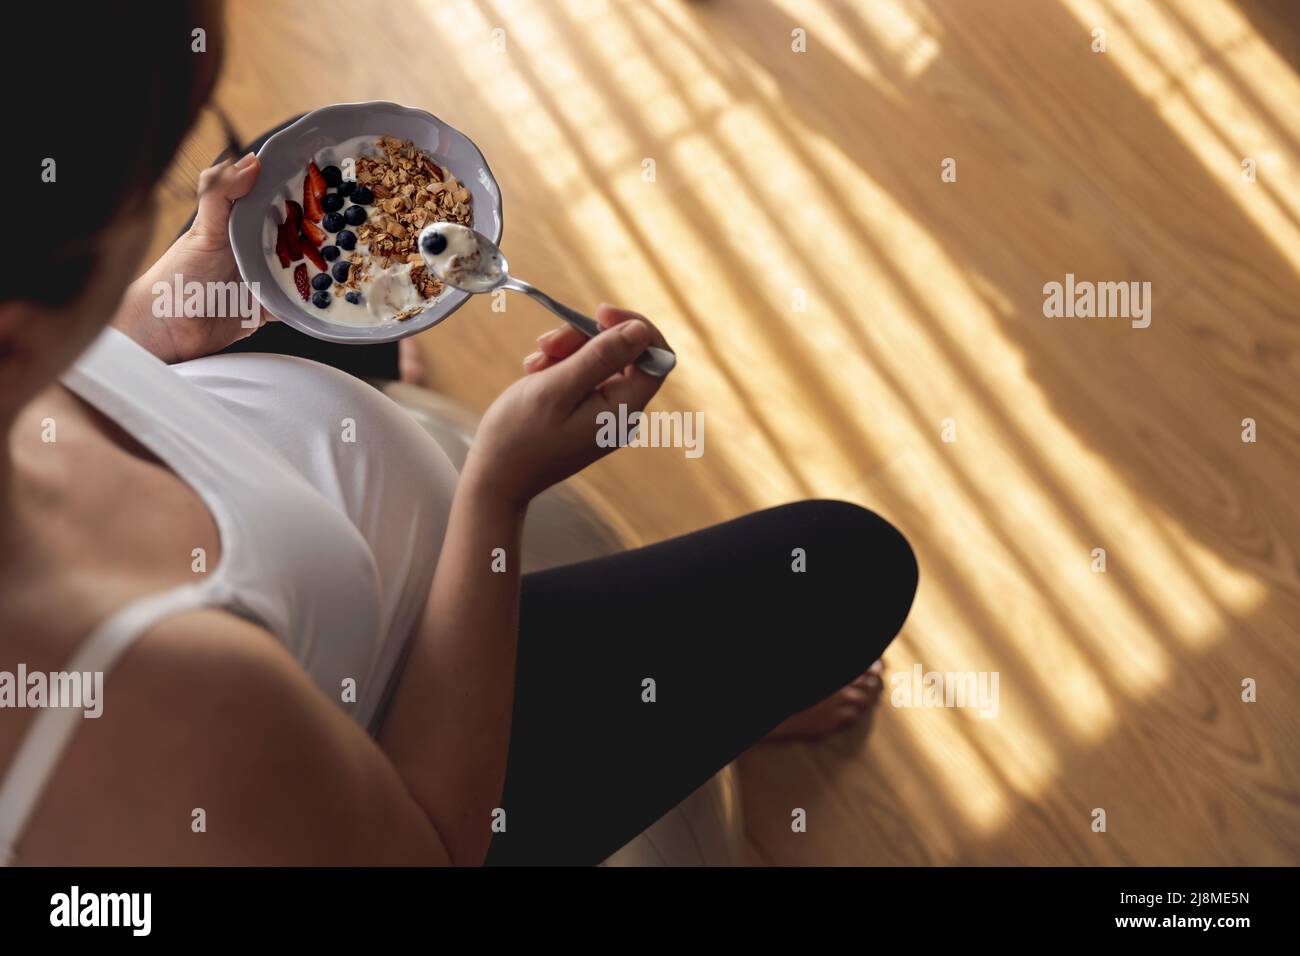 Pregnant woman working at home resting and eating healthy food Stock Photo